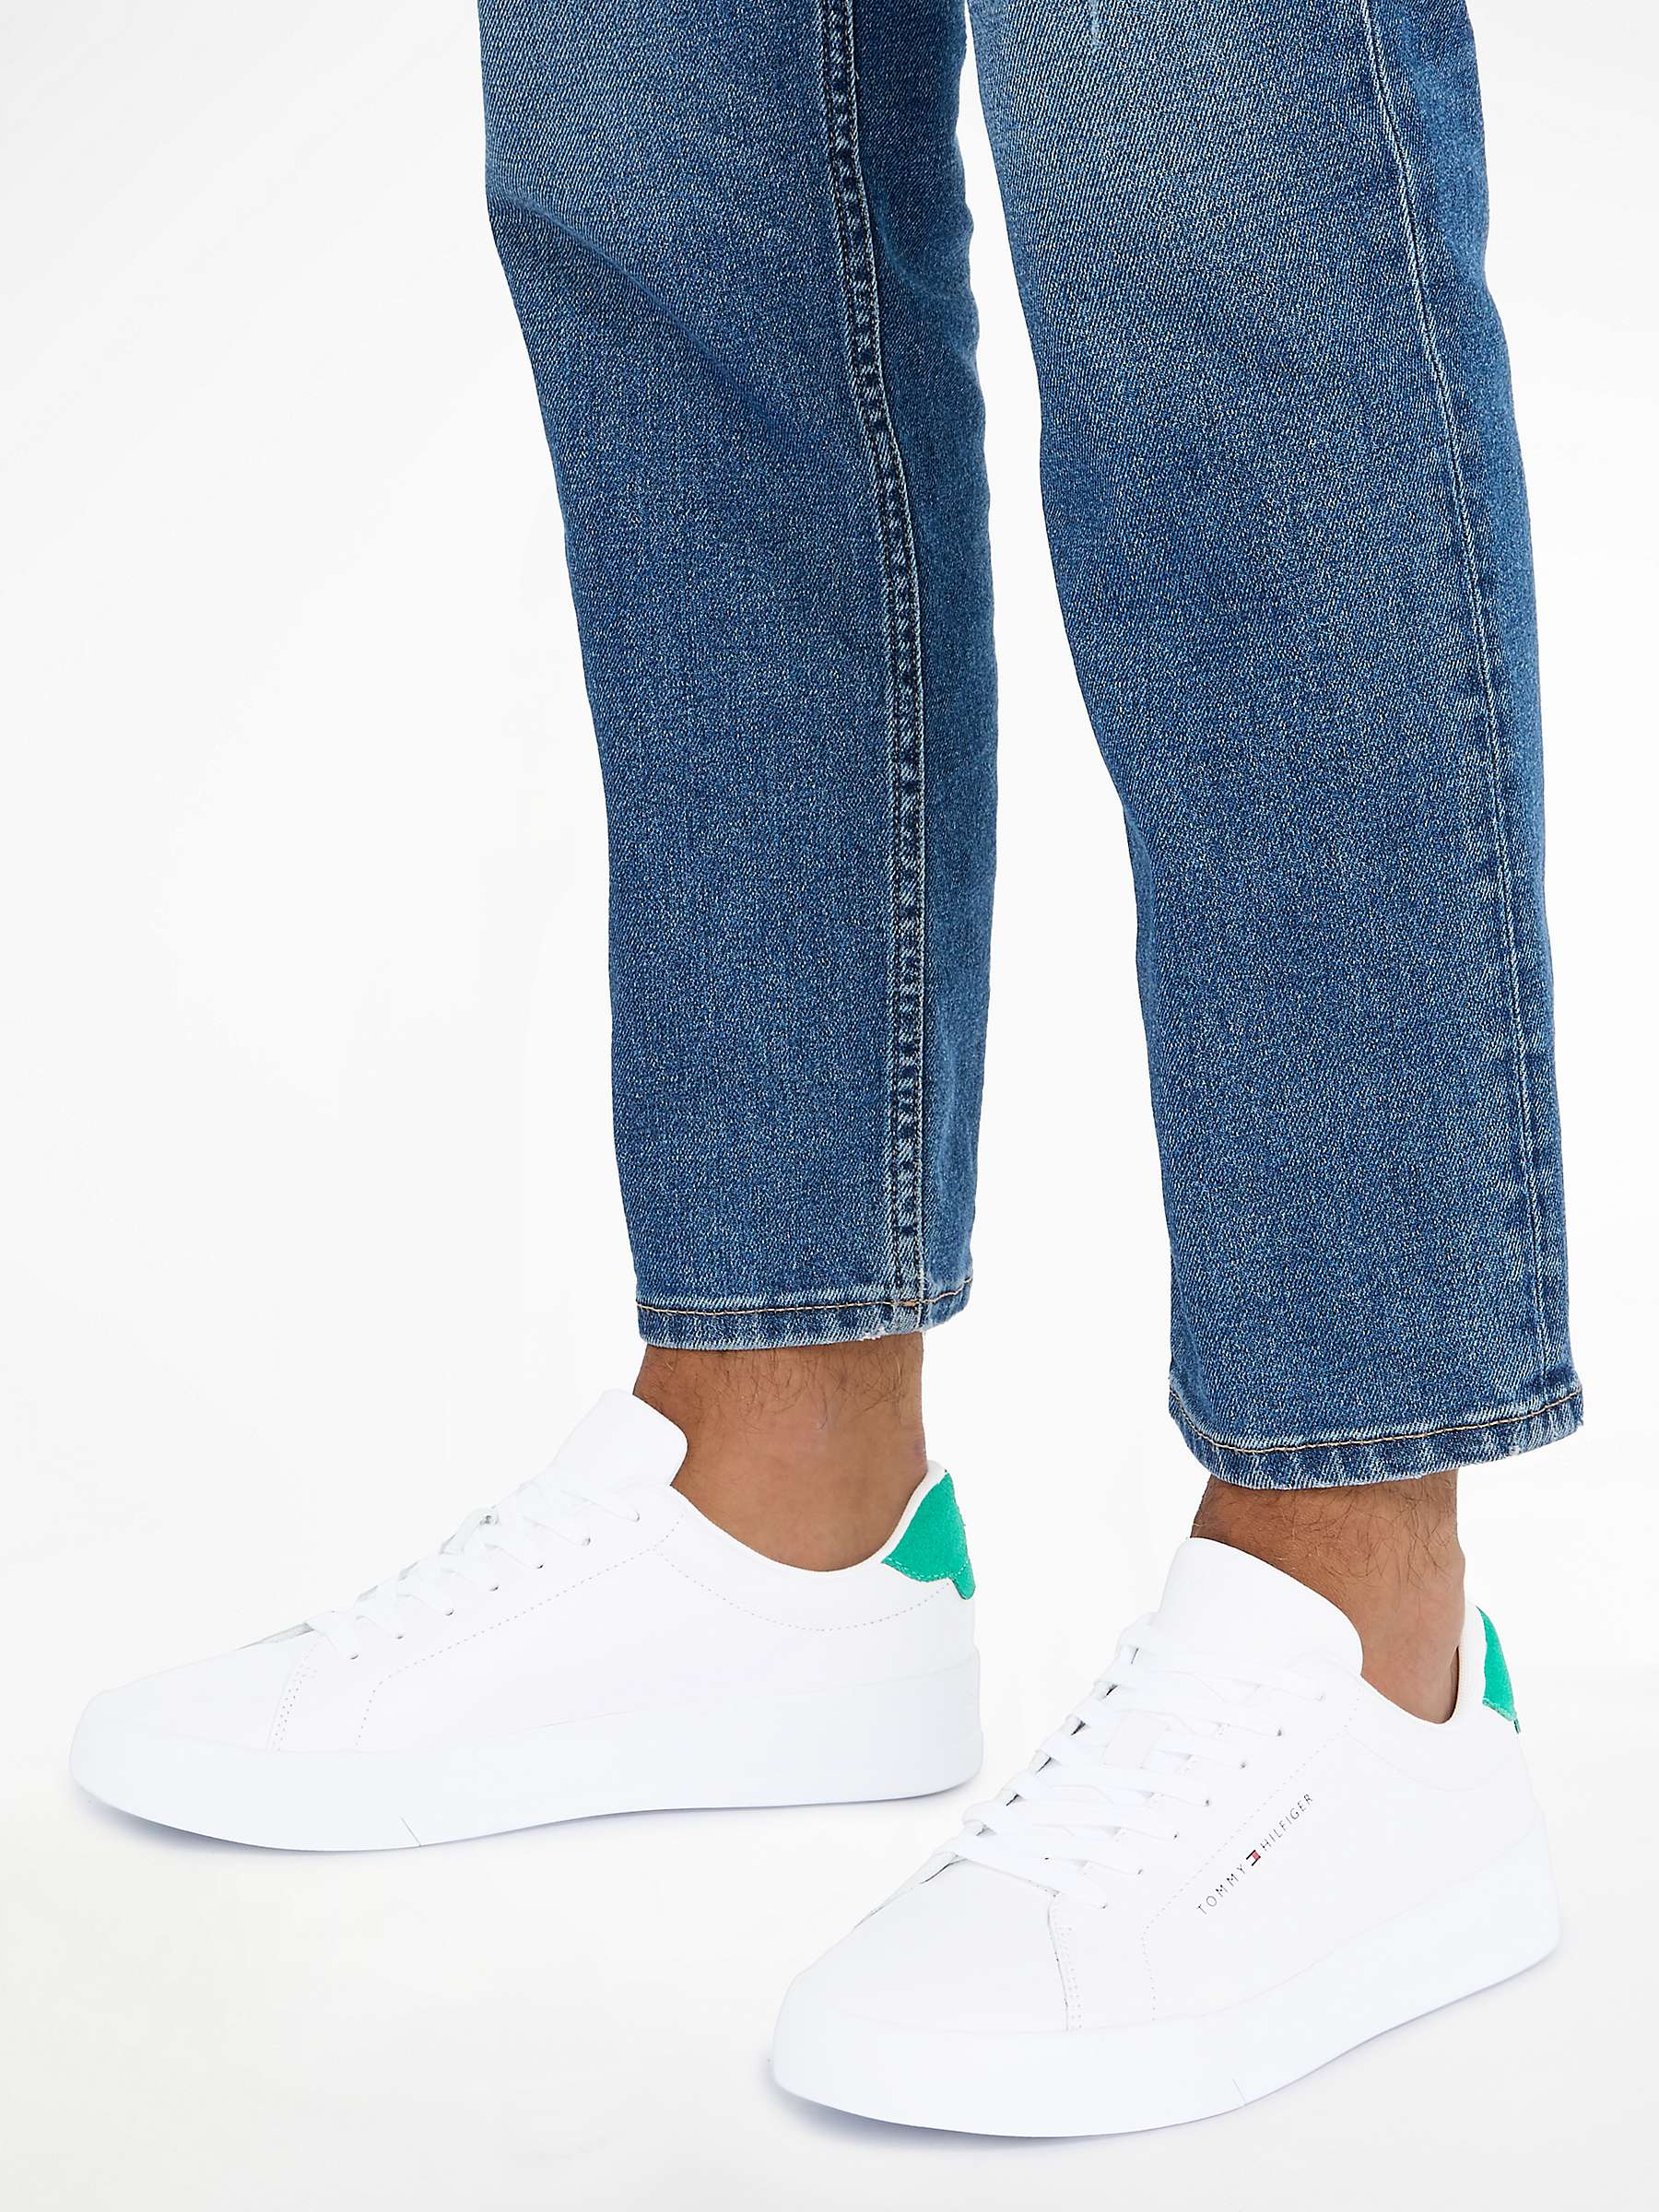 Buy Tommy Hilfiger Low Top Leather Trainers, White/Olympic Green Online at johnlewis.com